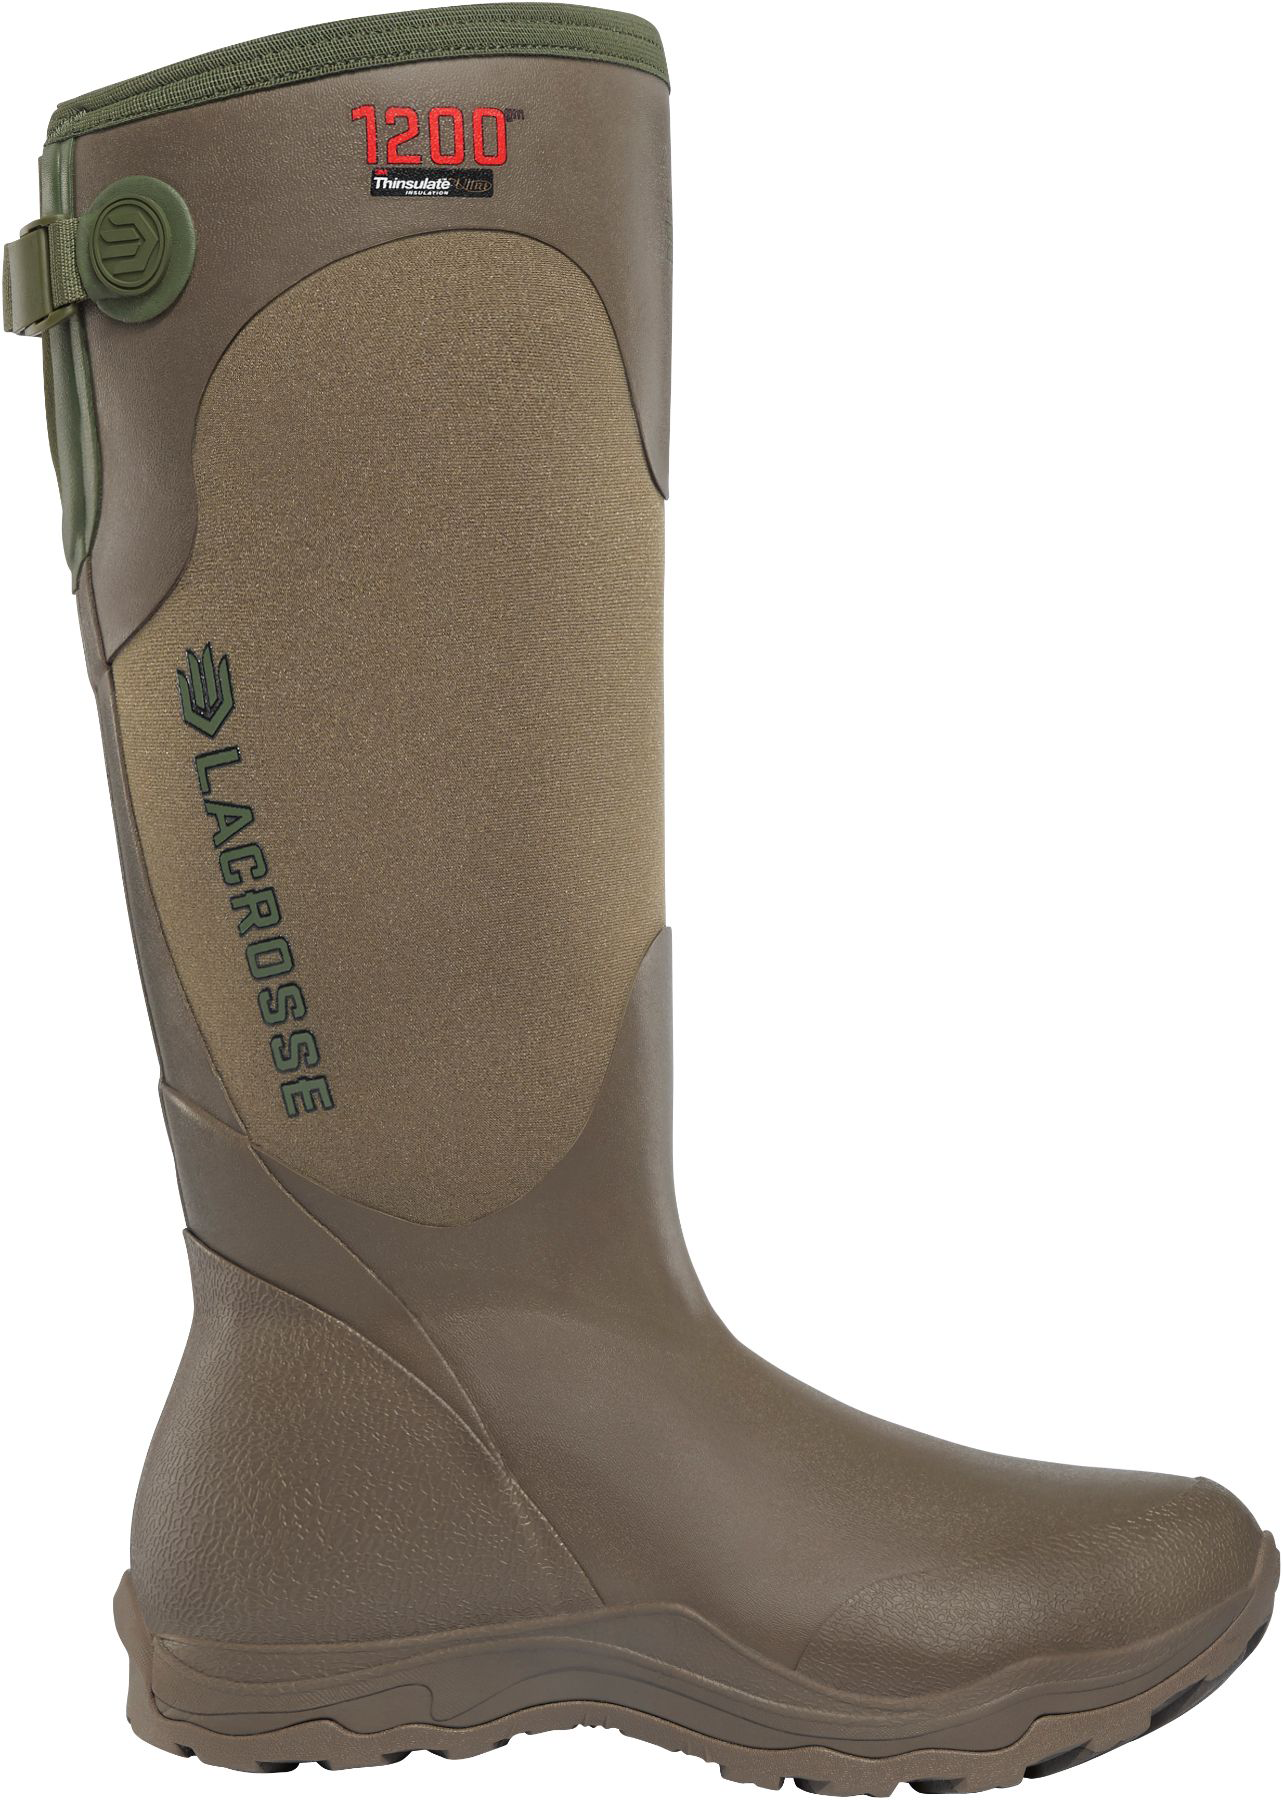 LaCrosse Alpha Agility 1200 Insulated Waterproof Hunting Boots for Ladies - Brown/Green - 5M